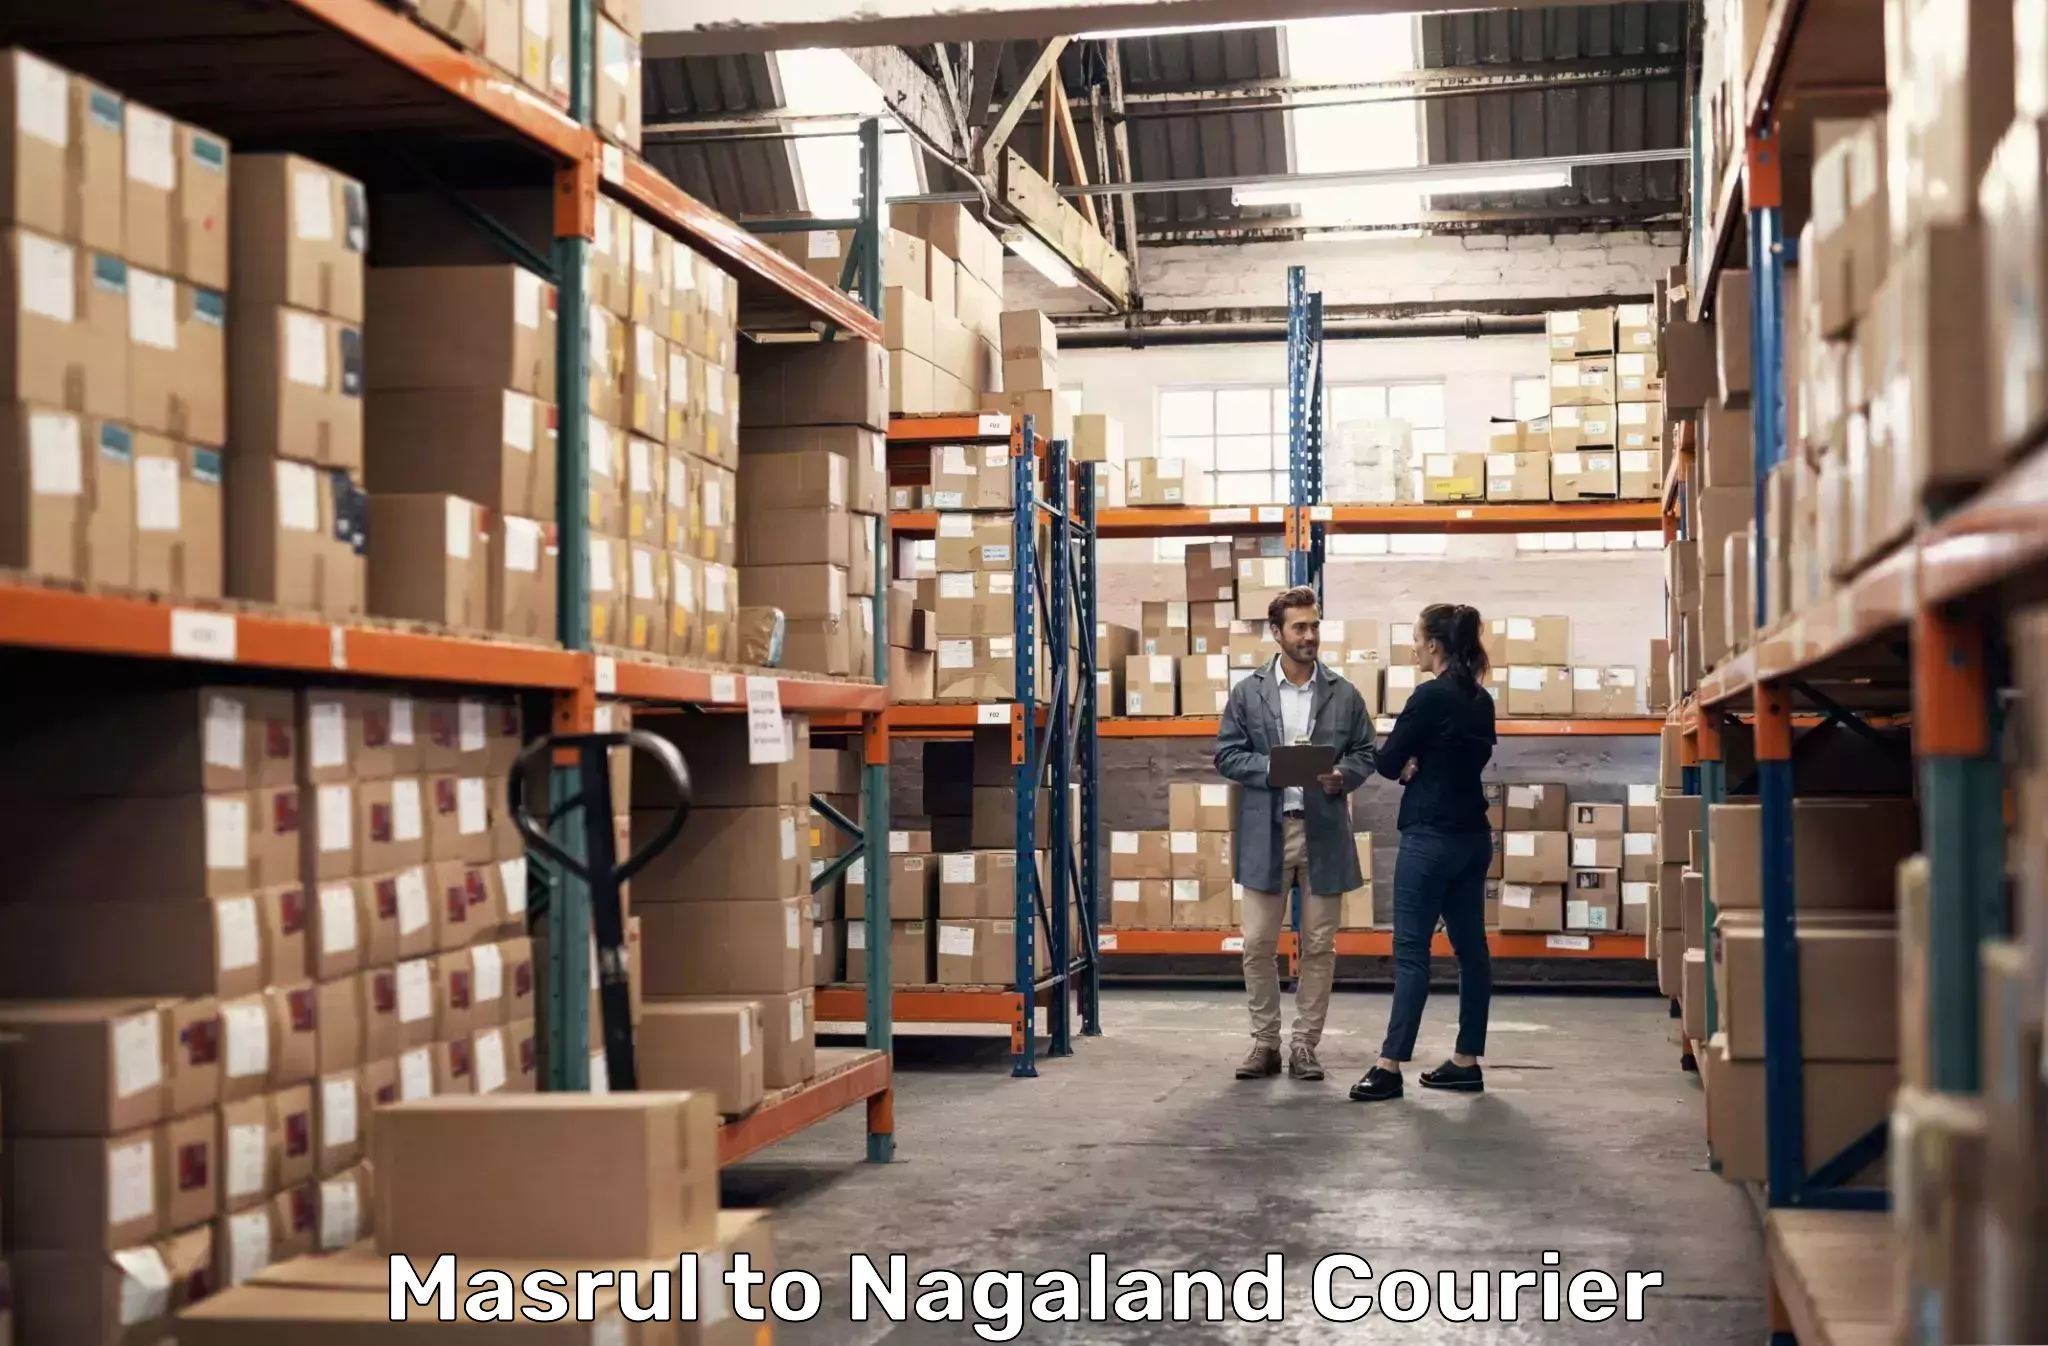 State-of-the-art courier technology Masrul to Nagaland